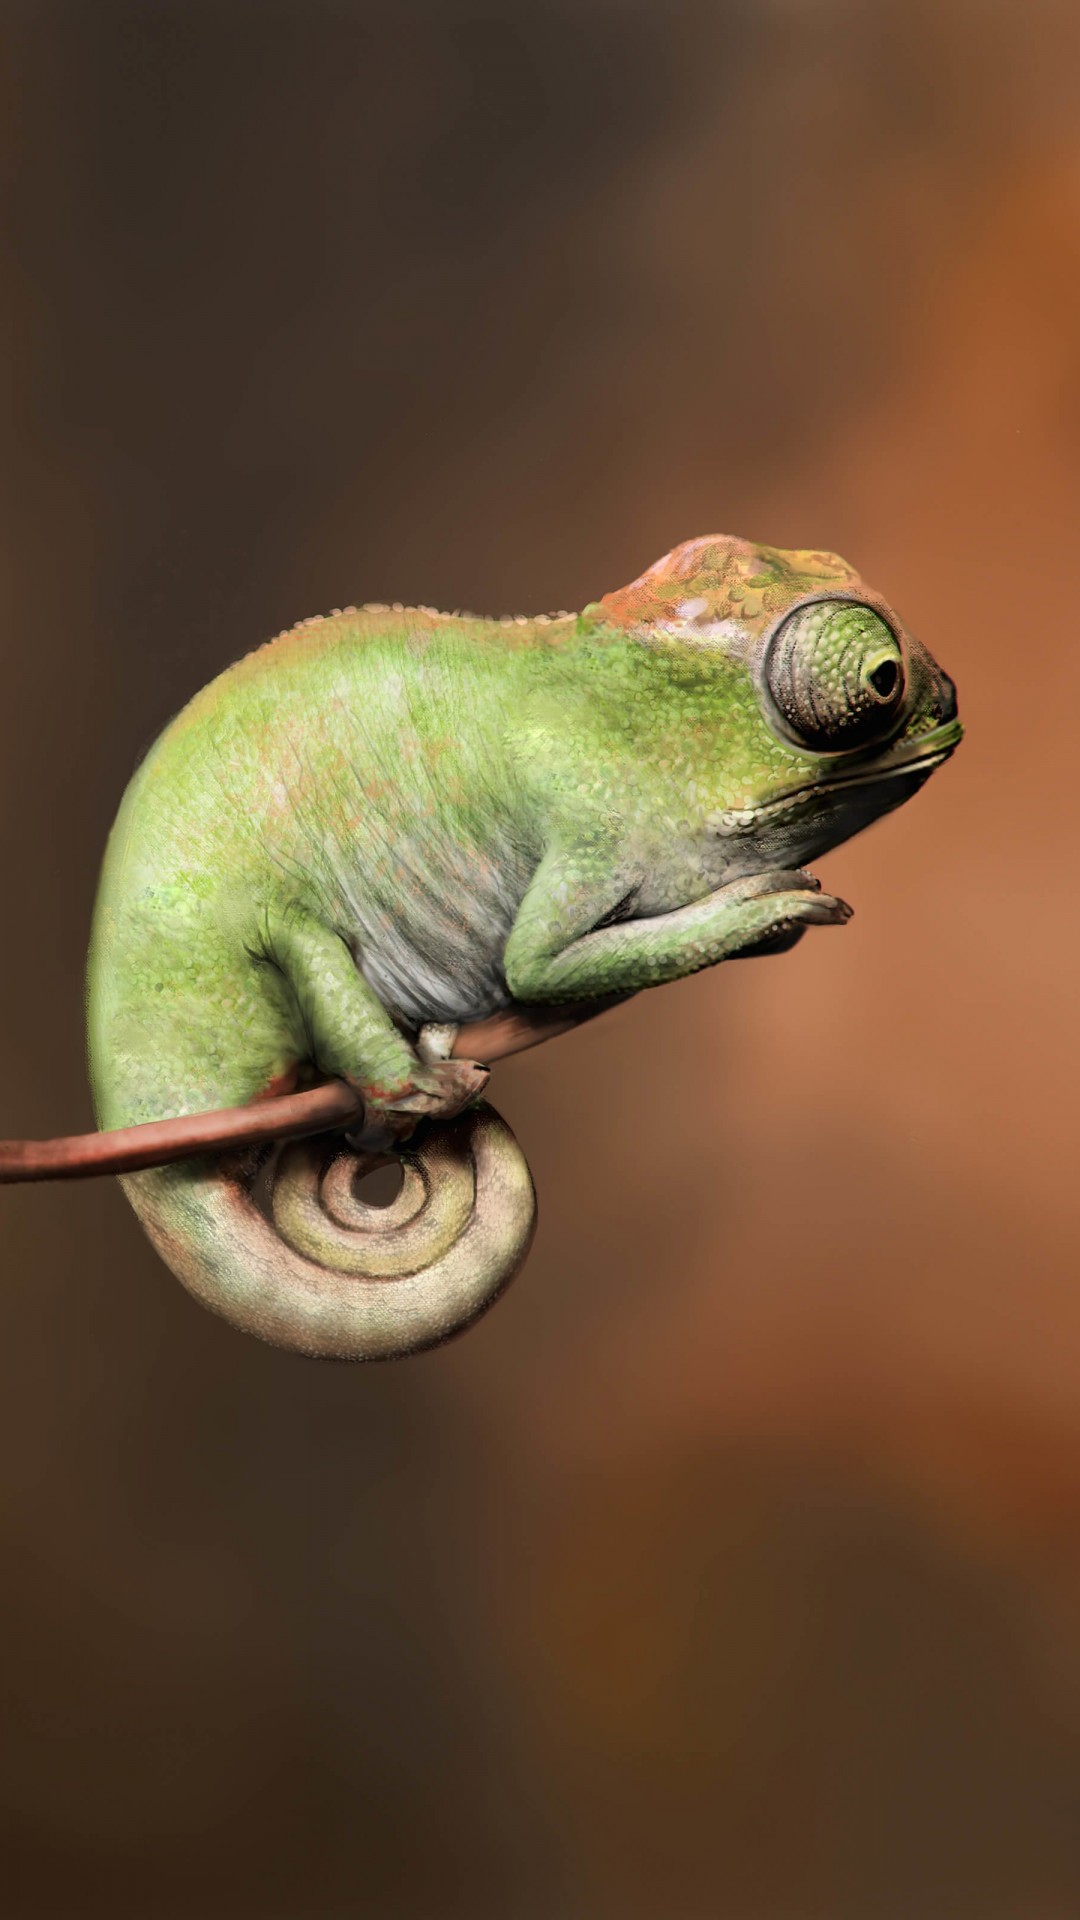 Baby Chameleon Perching On a Twisted Branch Wallpaper for Google Nexus 5